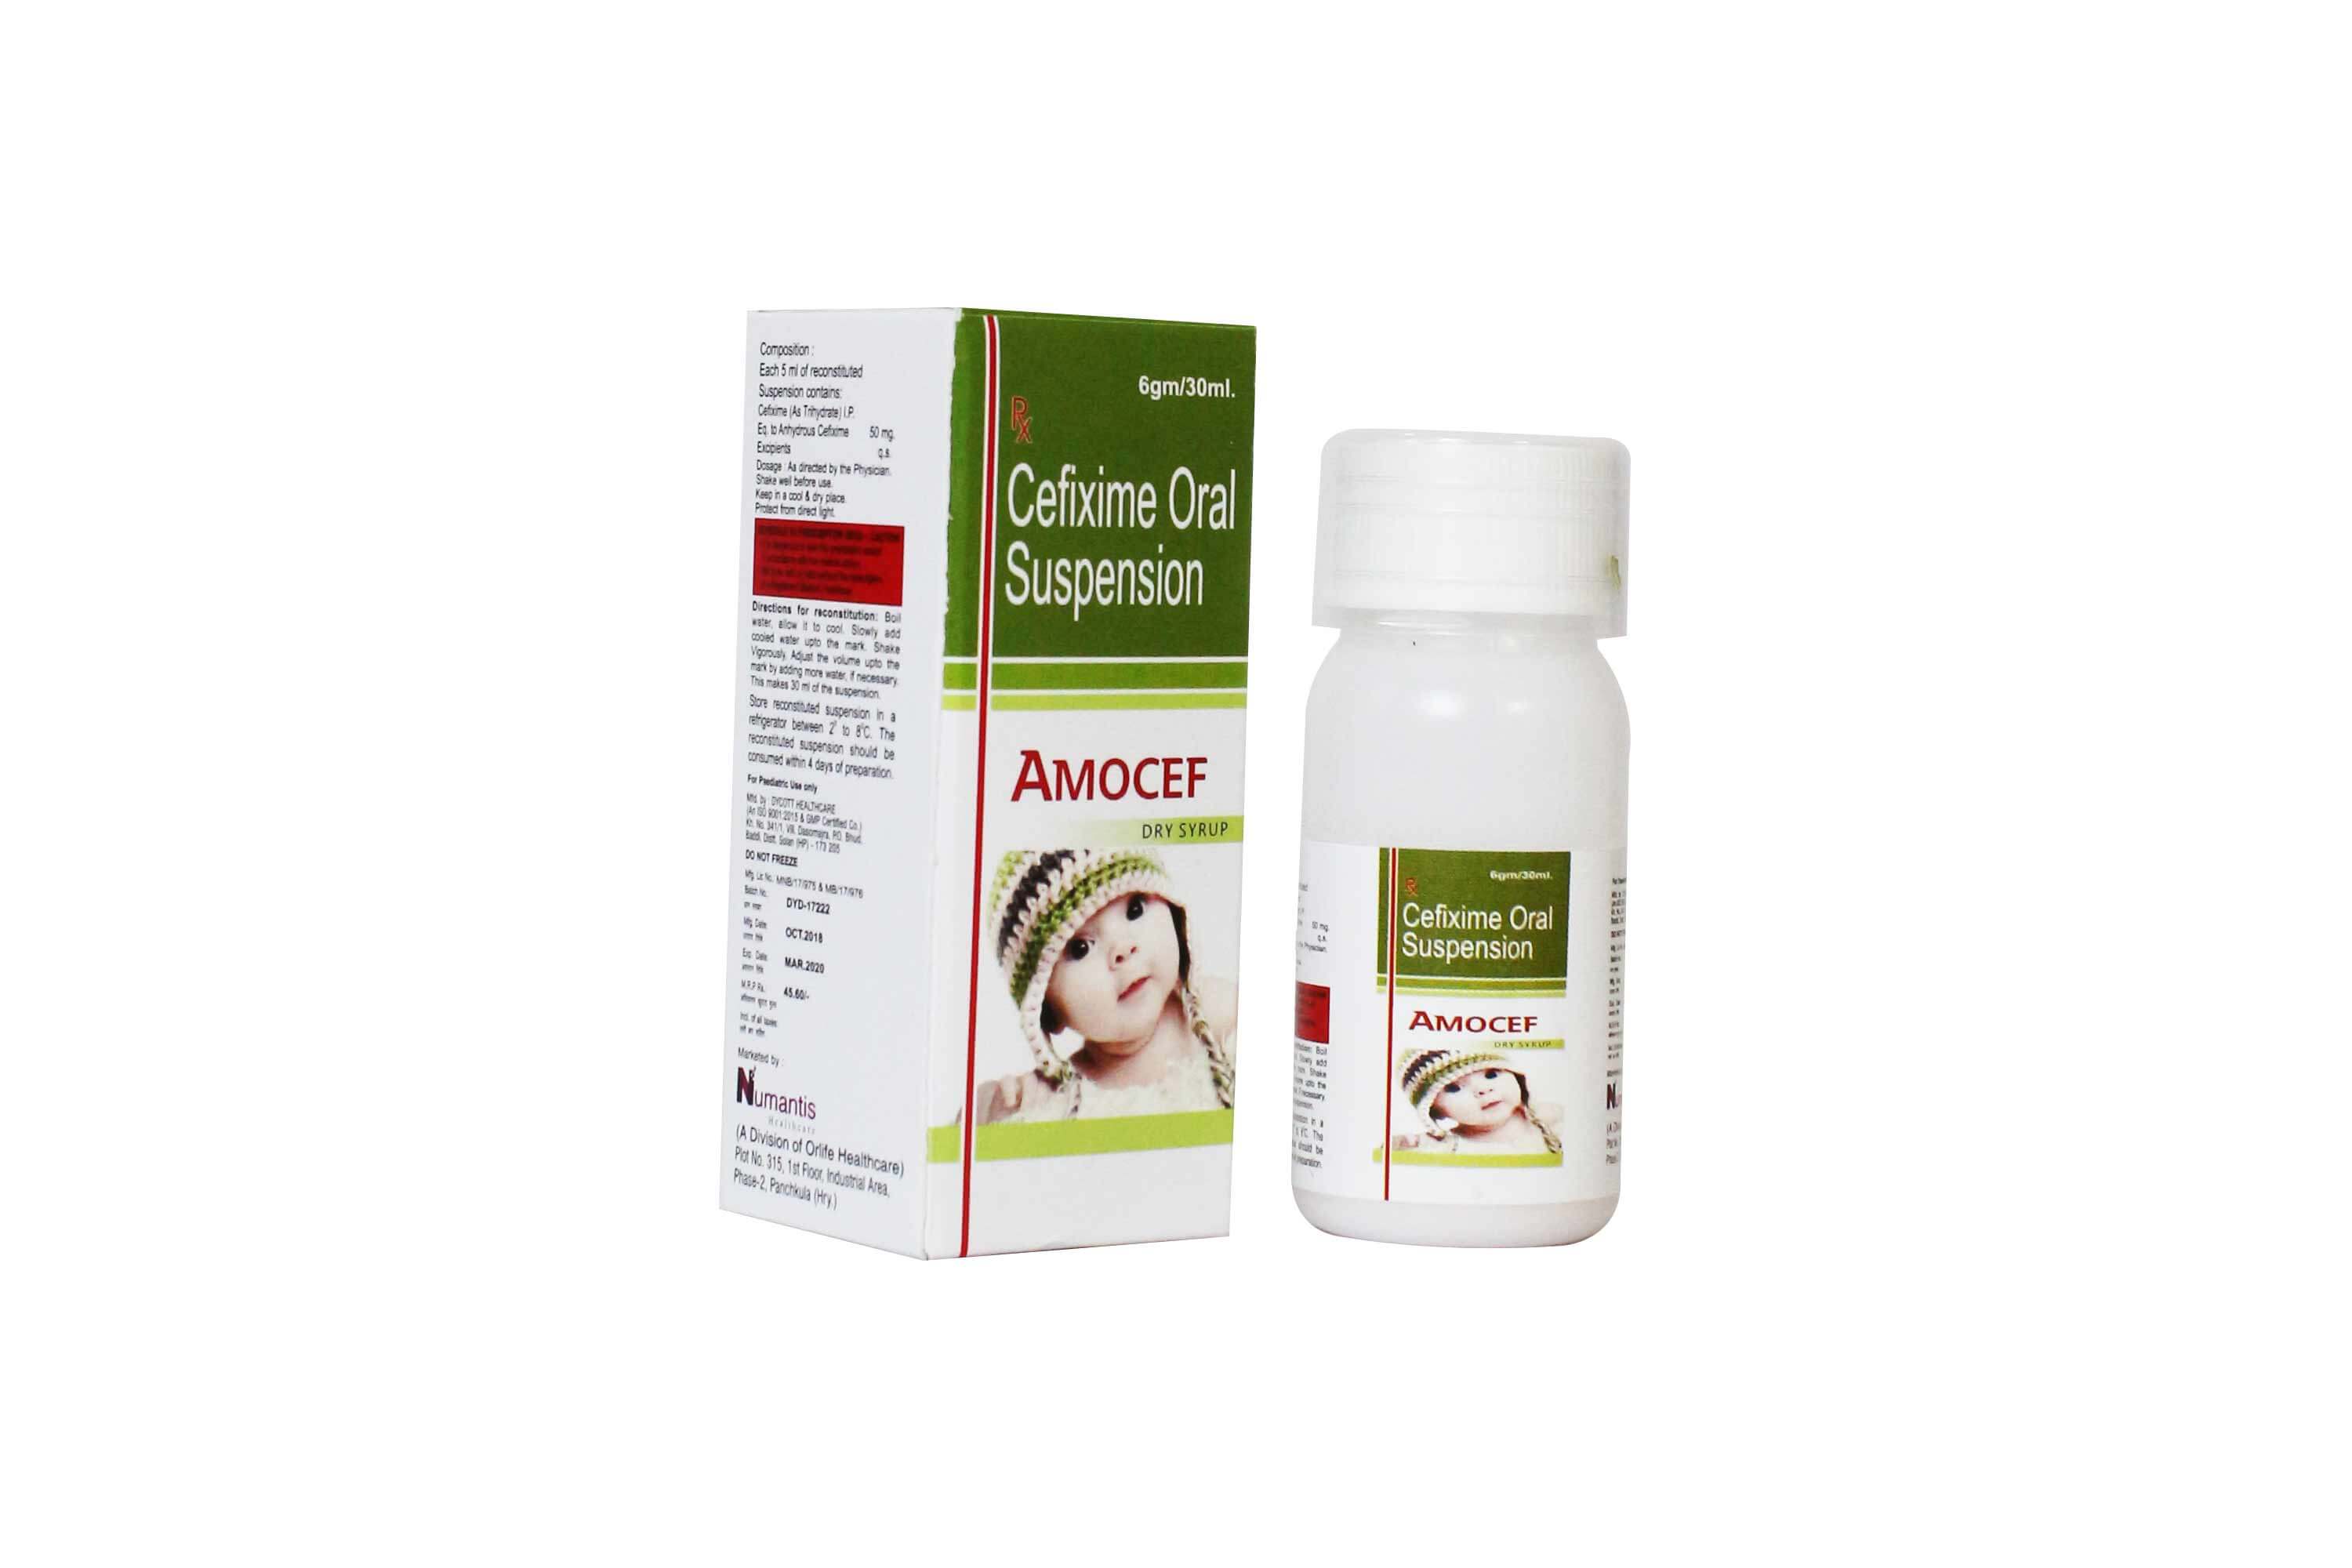 Product Name: Amocef, Compositions of Amocef are Cefixime Oral Suspension IP - Numantis Healthcare